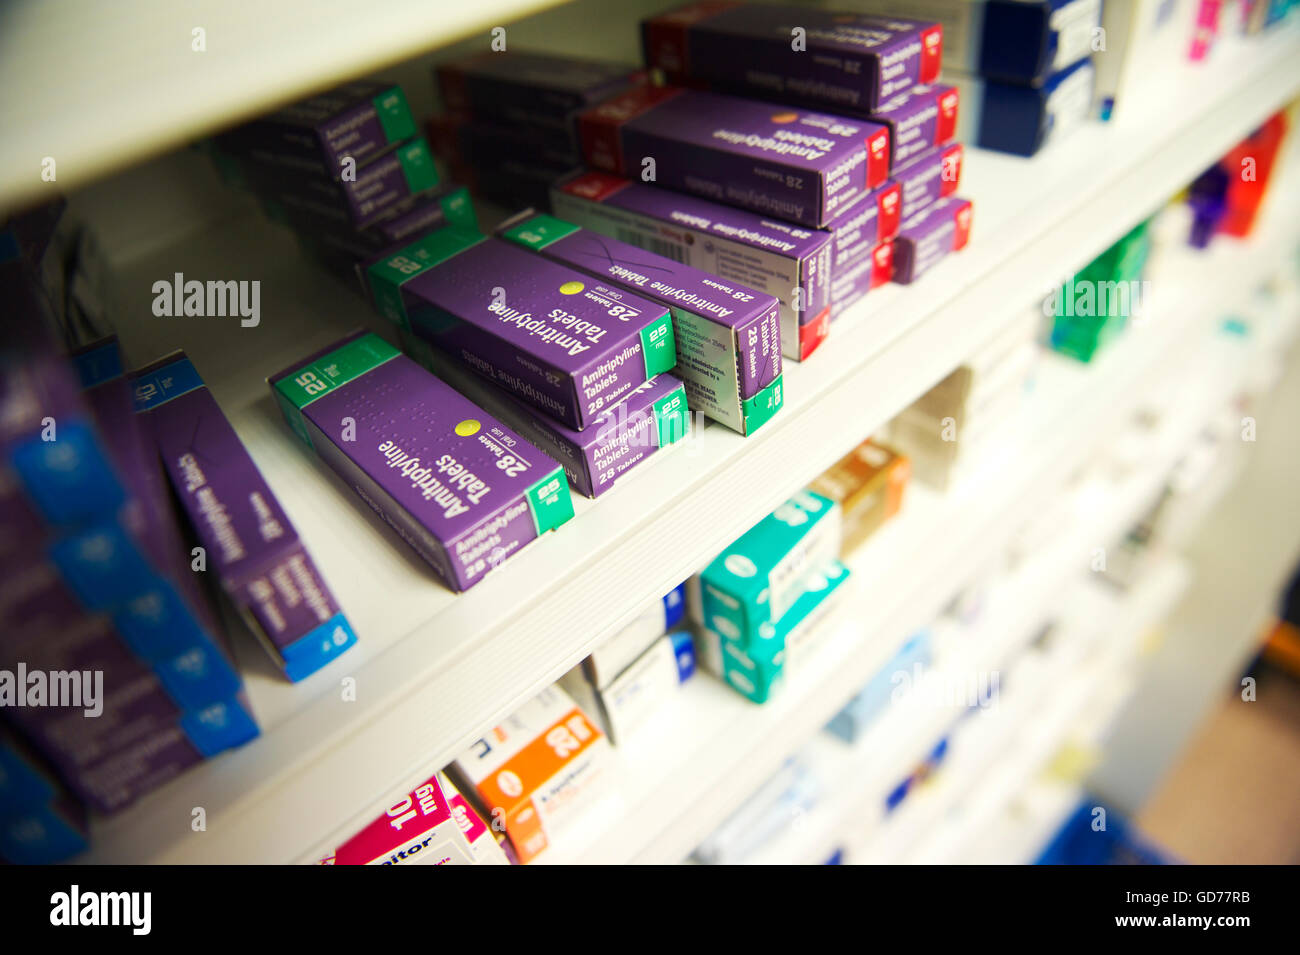 Shelves stacked full of prescription drugs in NHS and private pharmacy Stock Photo